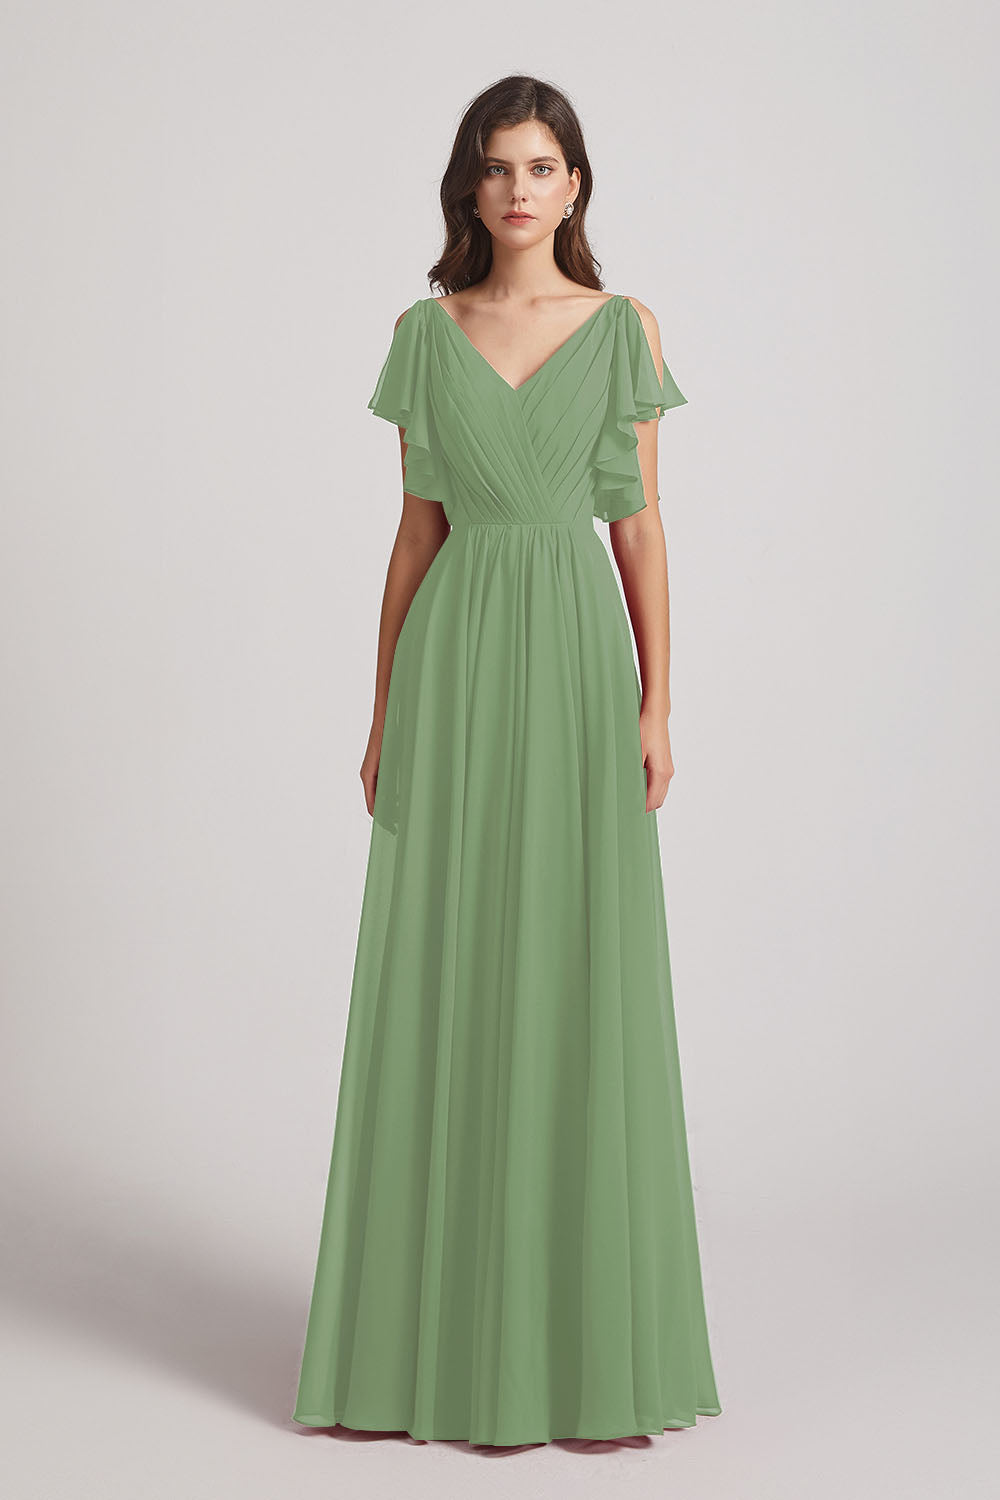 Alfa Bridal Seagrass V-Neck Pleated Chiffon Bridesmaid Dresses with Open Flutter Sleeves (AF0098)